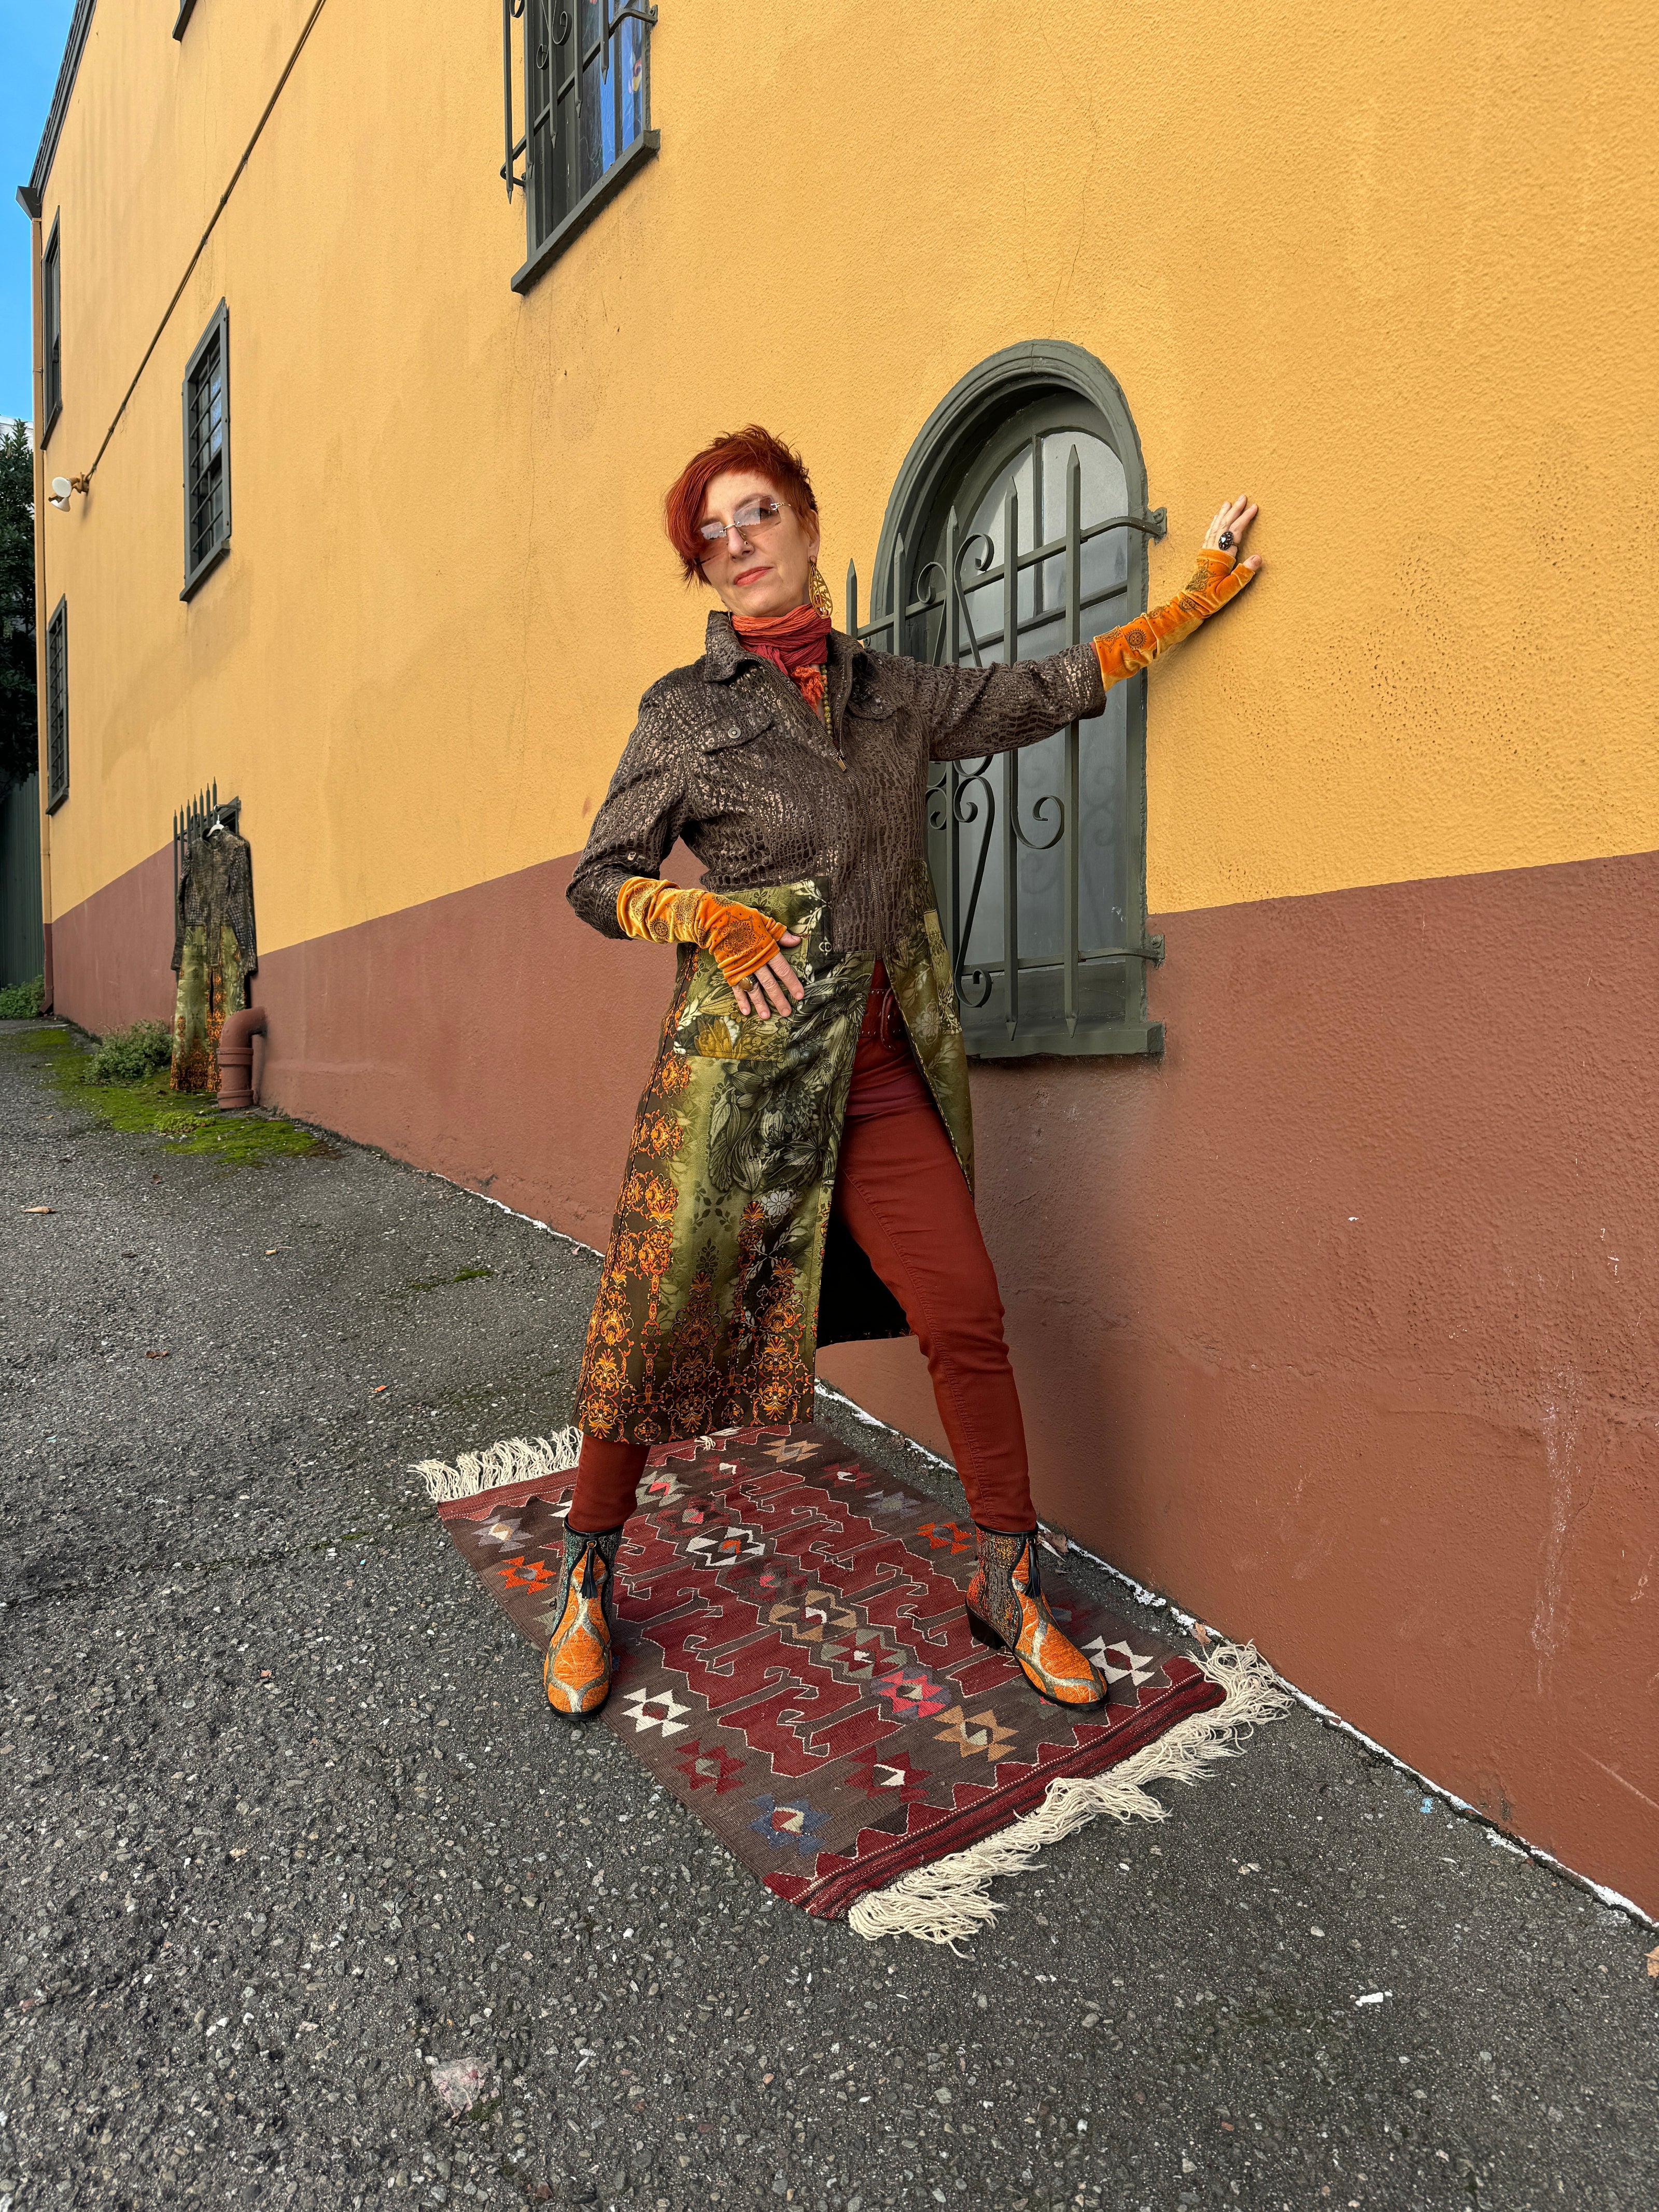 Owner & designer Andrea Serrahn modeling at her fashion boutique in the San Francisco Bay Area specializing in colorful and contemporary clothing for women.